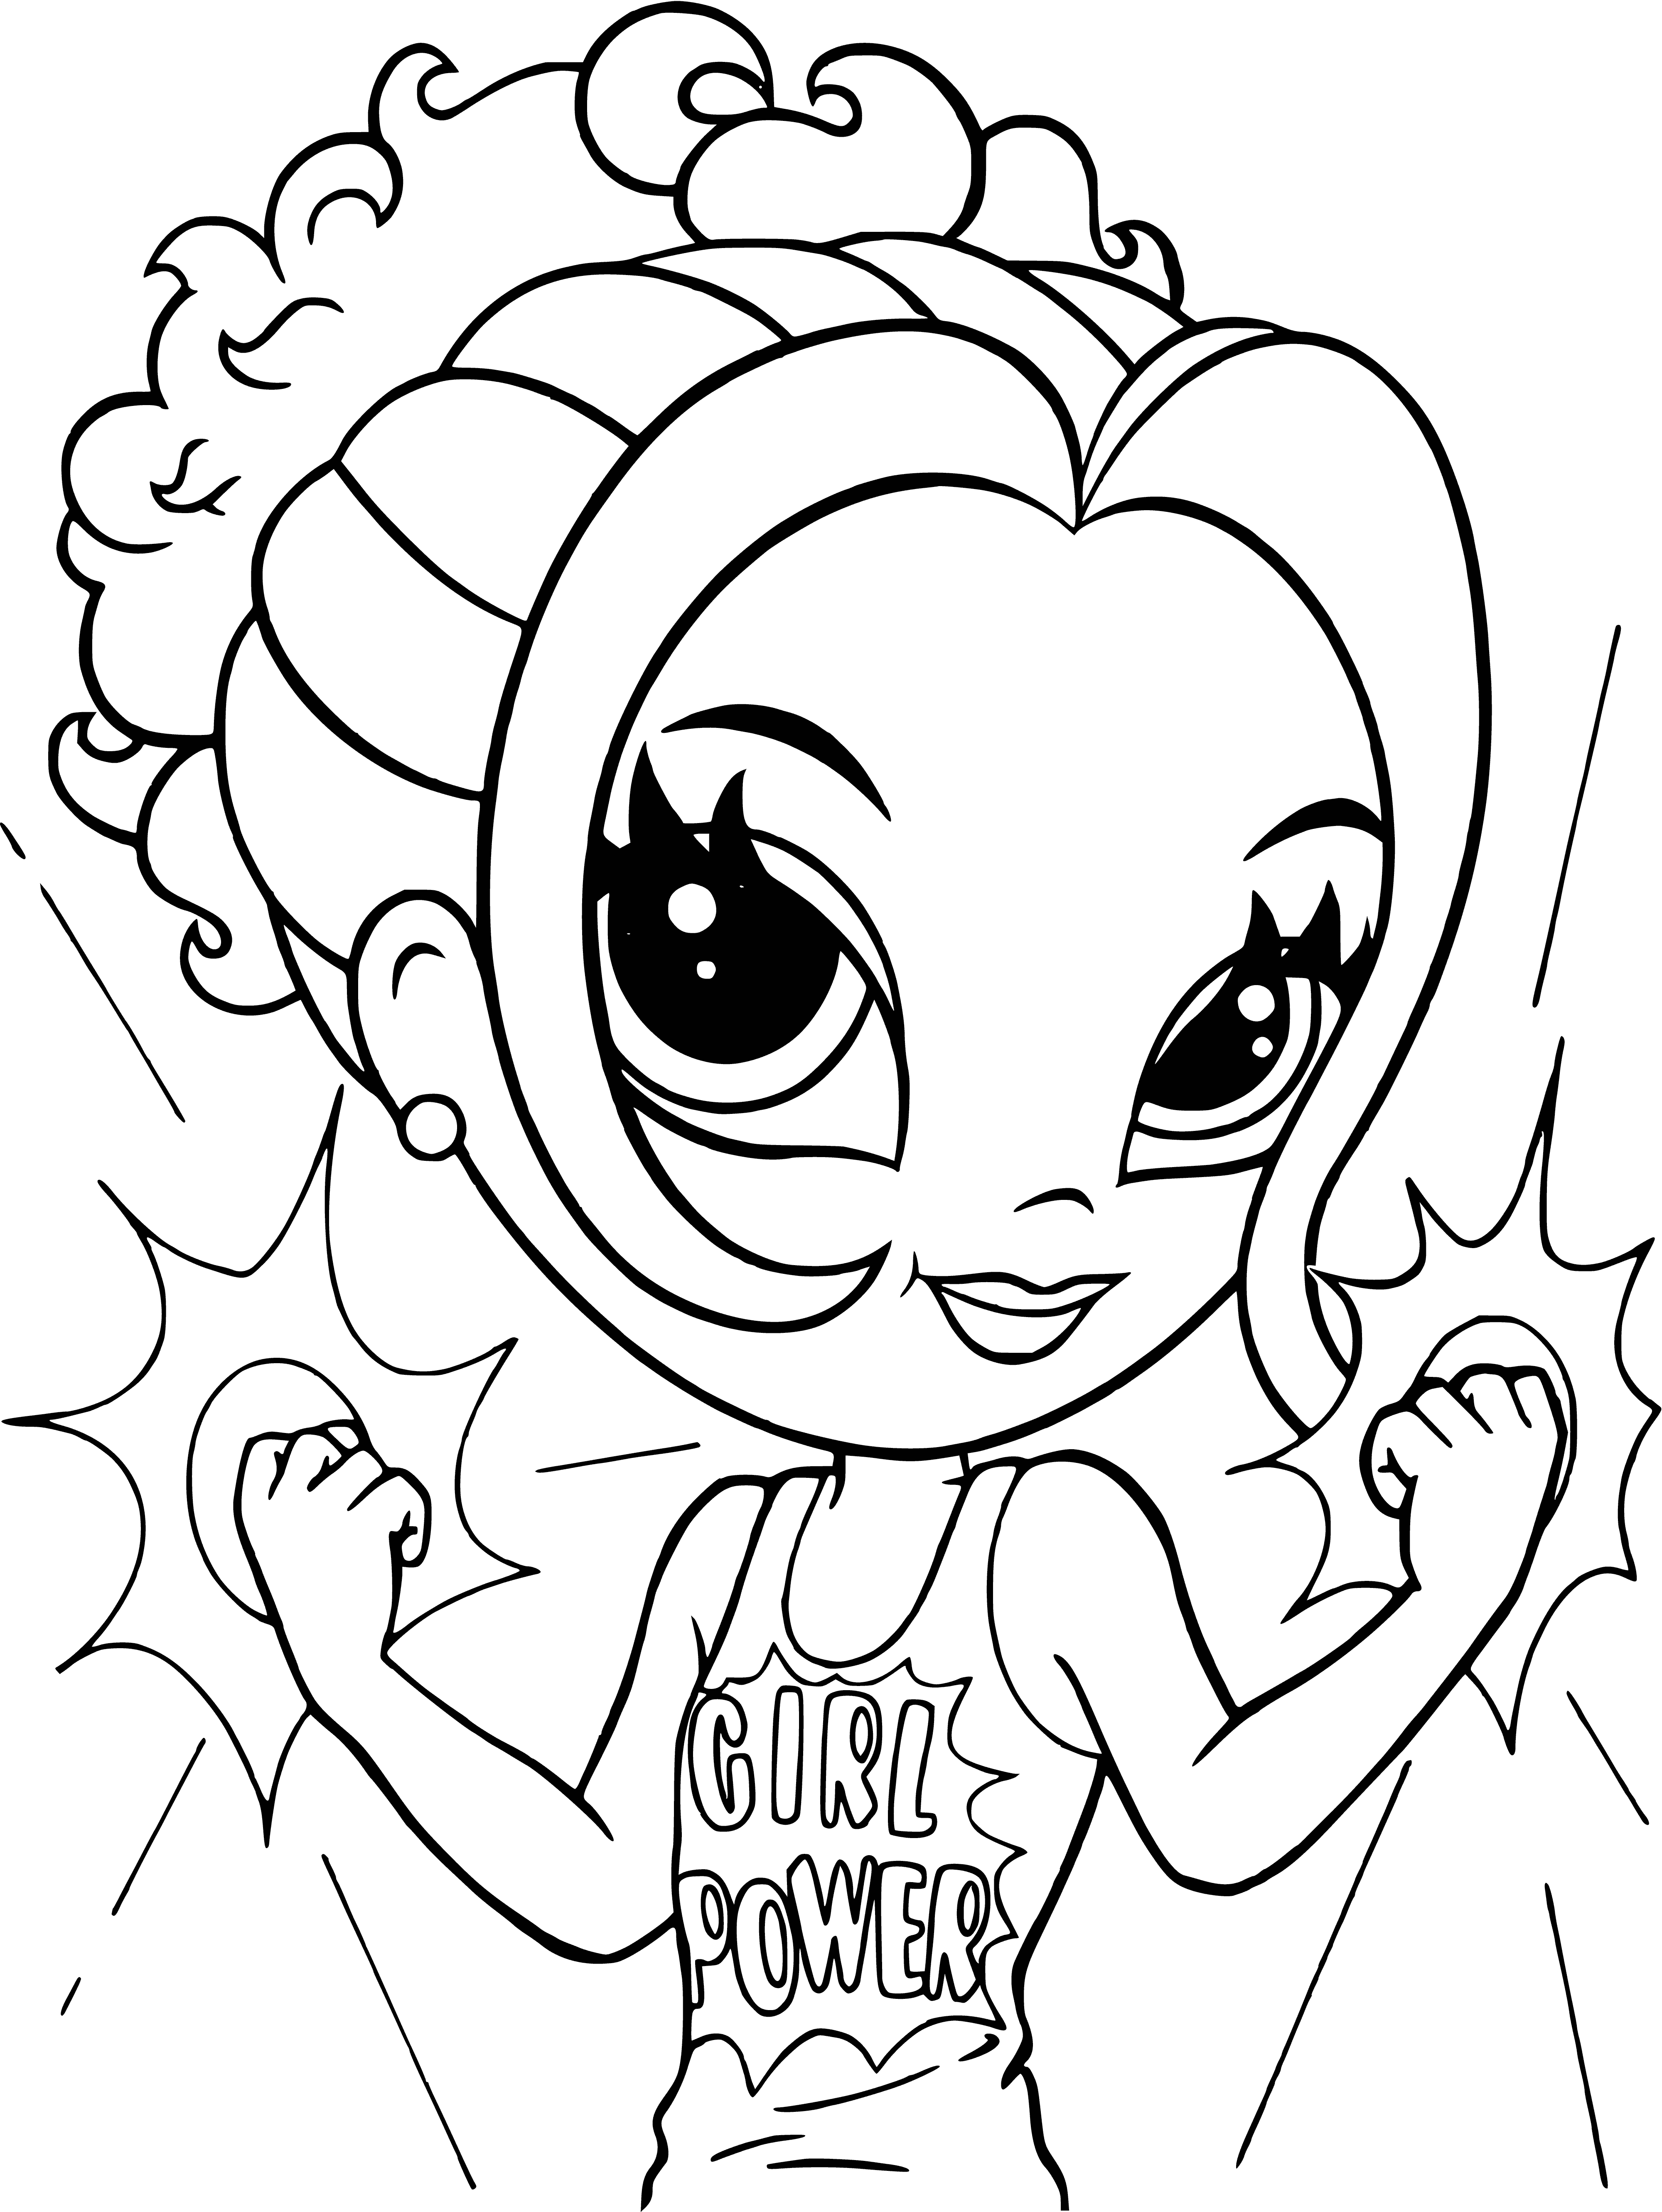 coloring page: Glamorous girl wearing pink dress & bow, carrying pink purse & flower, set against a white background. #LisaFrank #GlamGirl #Pink